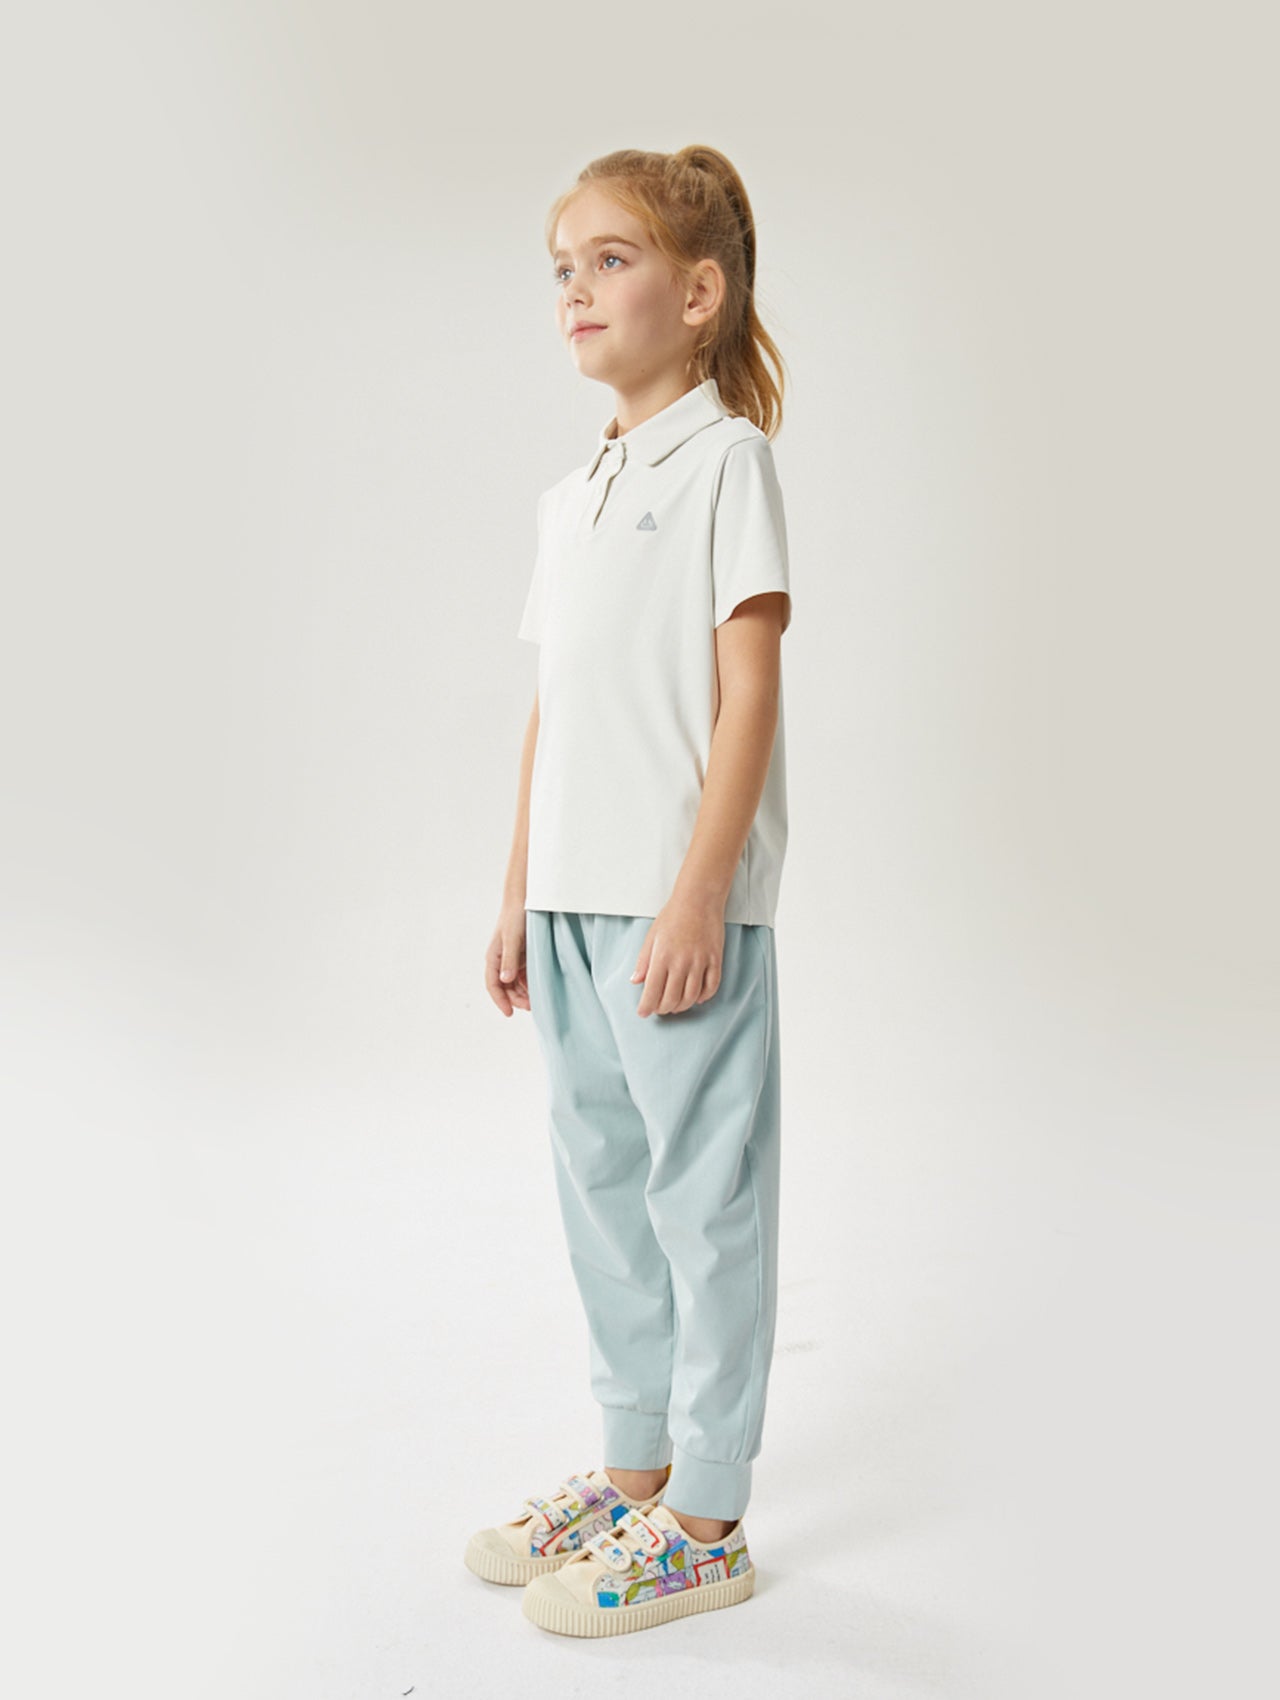 Breathable Cotton Family Matching Sweatpants